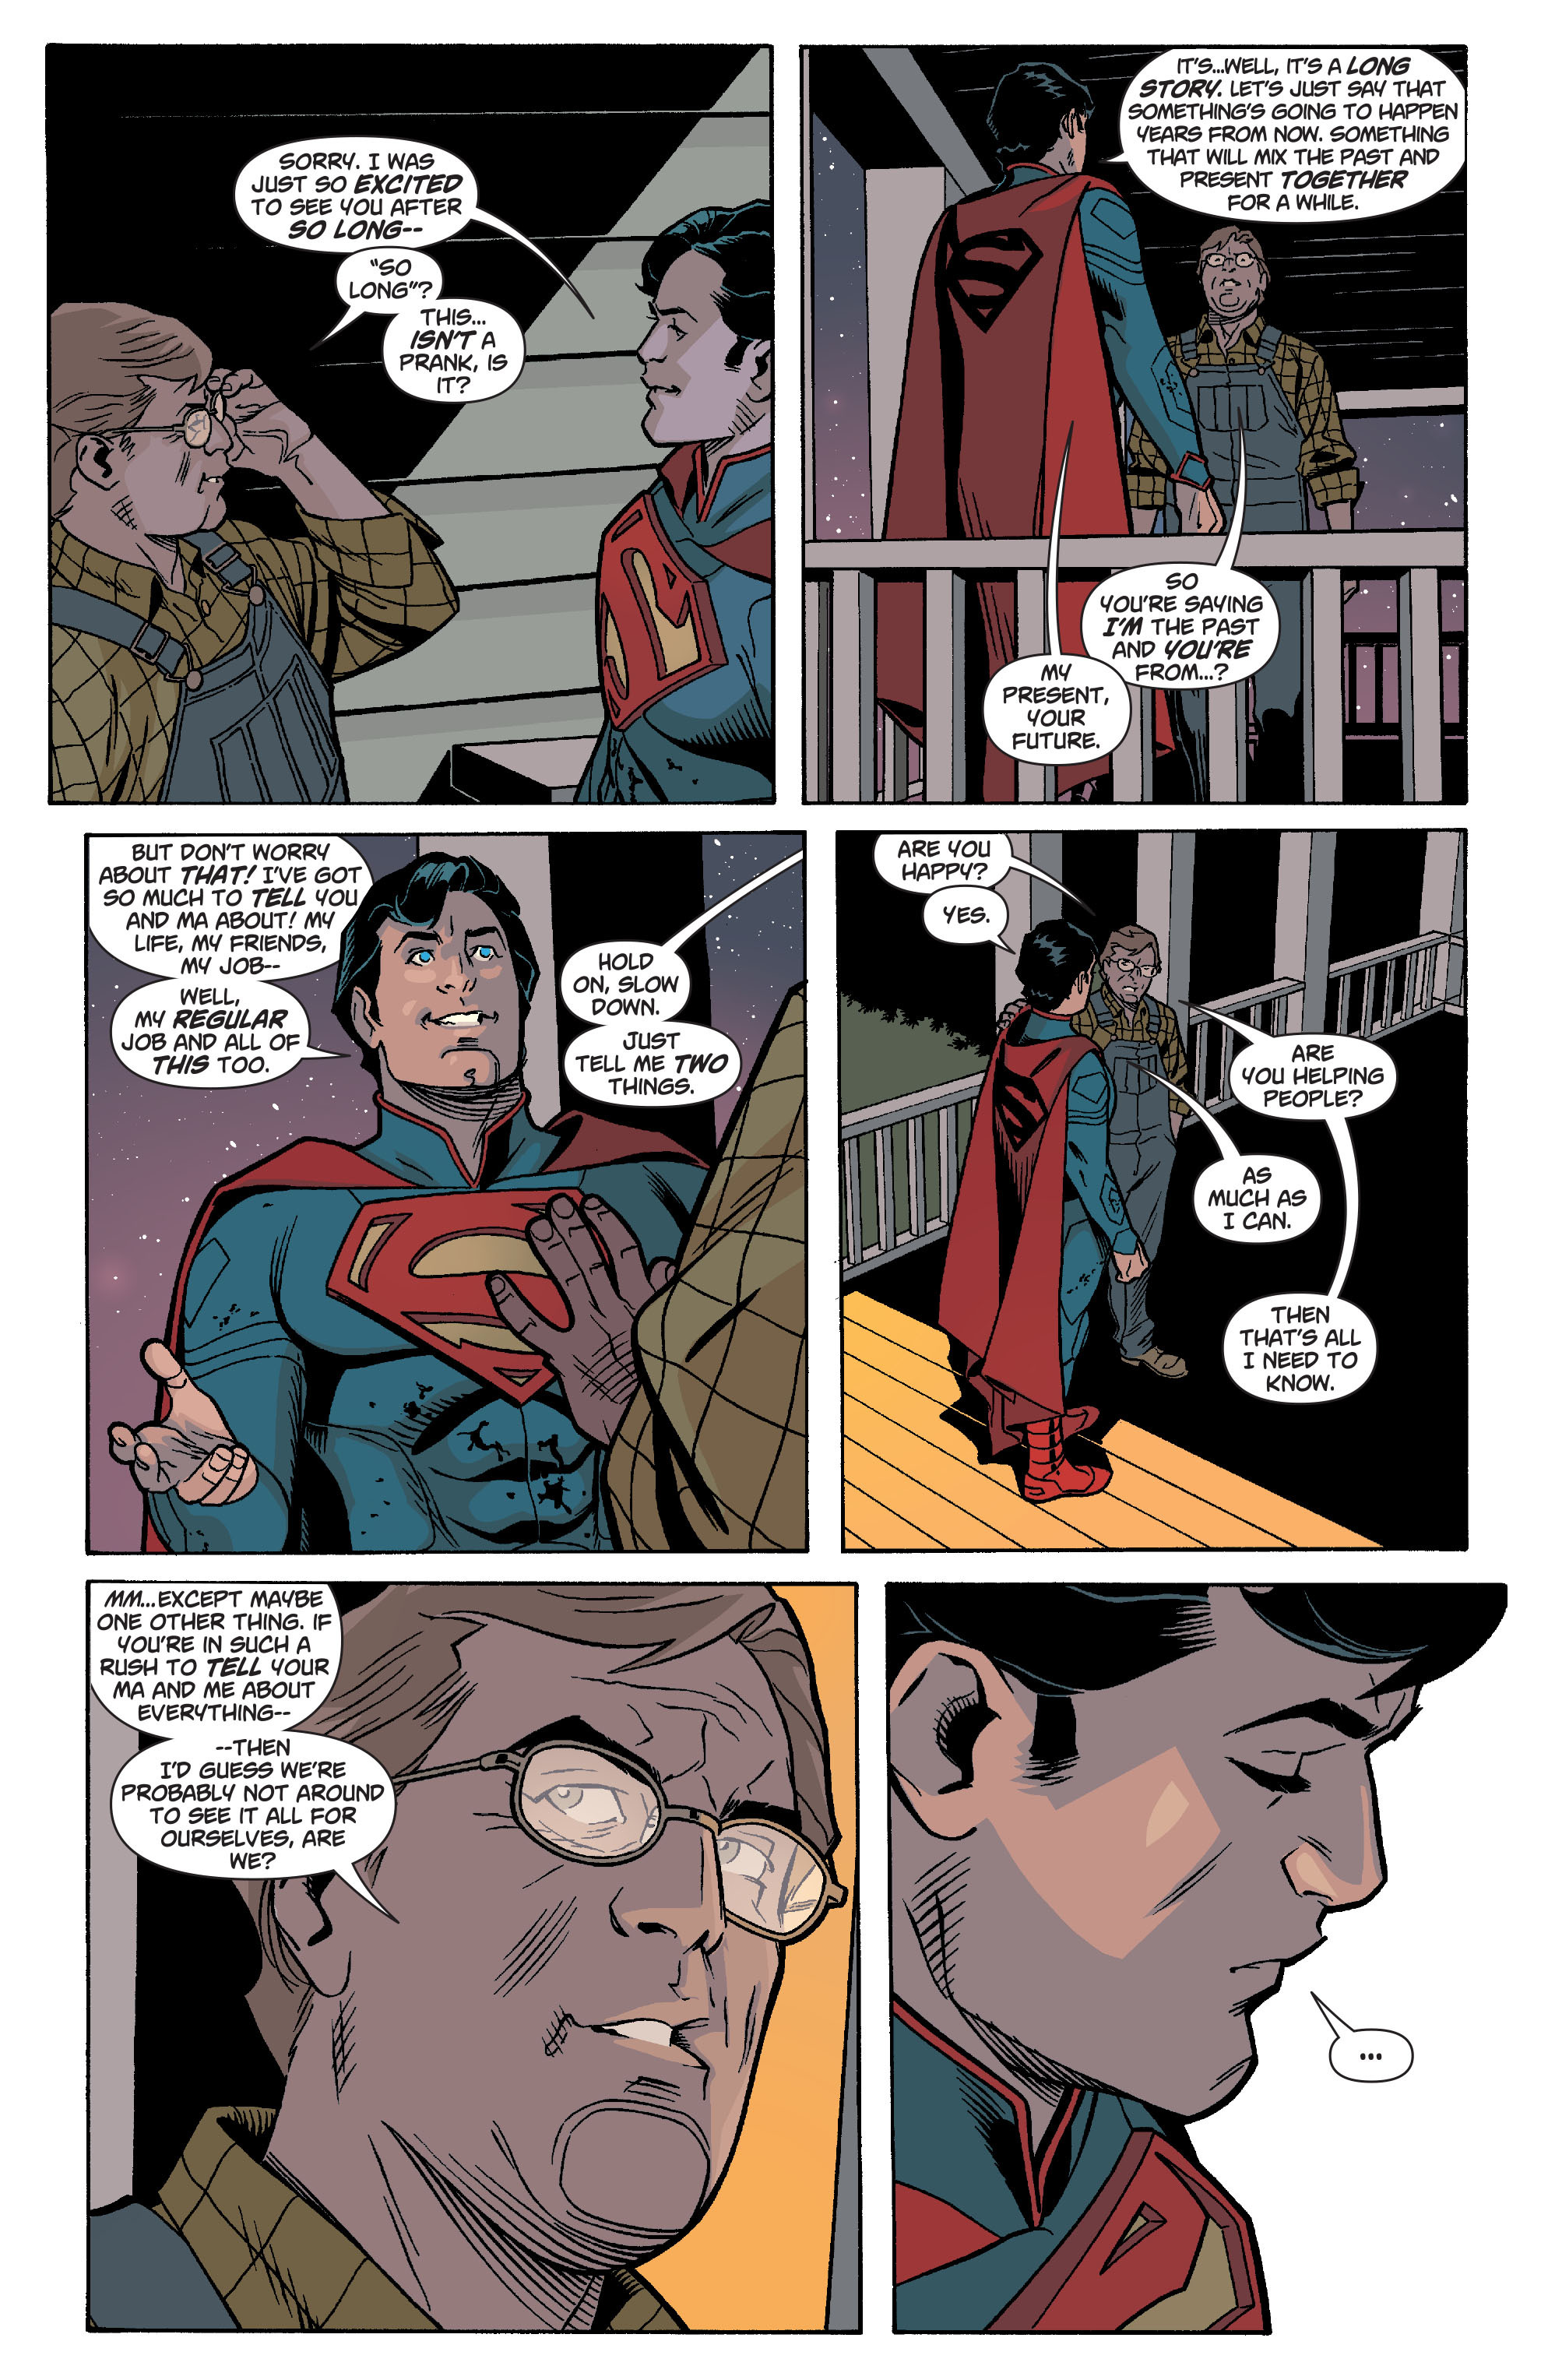 Action Comics 11 16 New 52 Chapter 17 Page 29